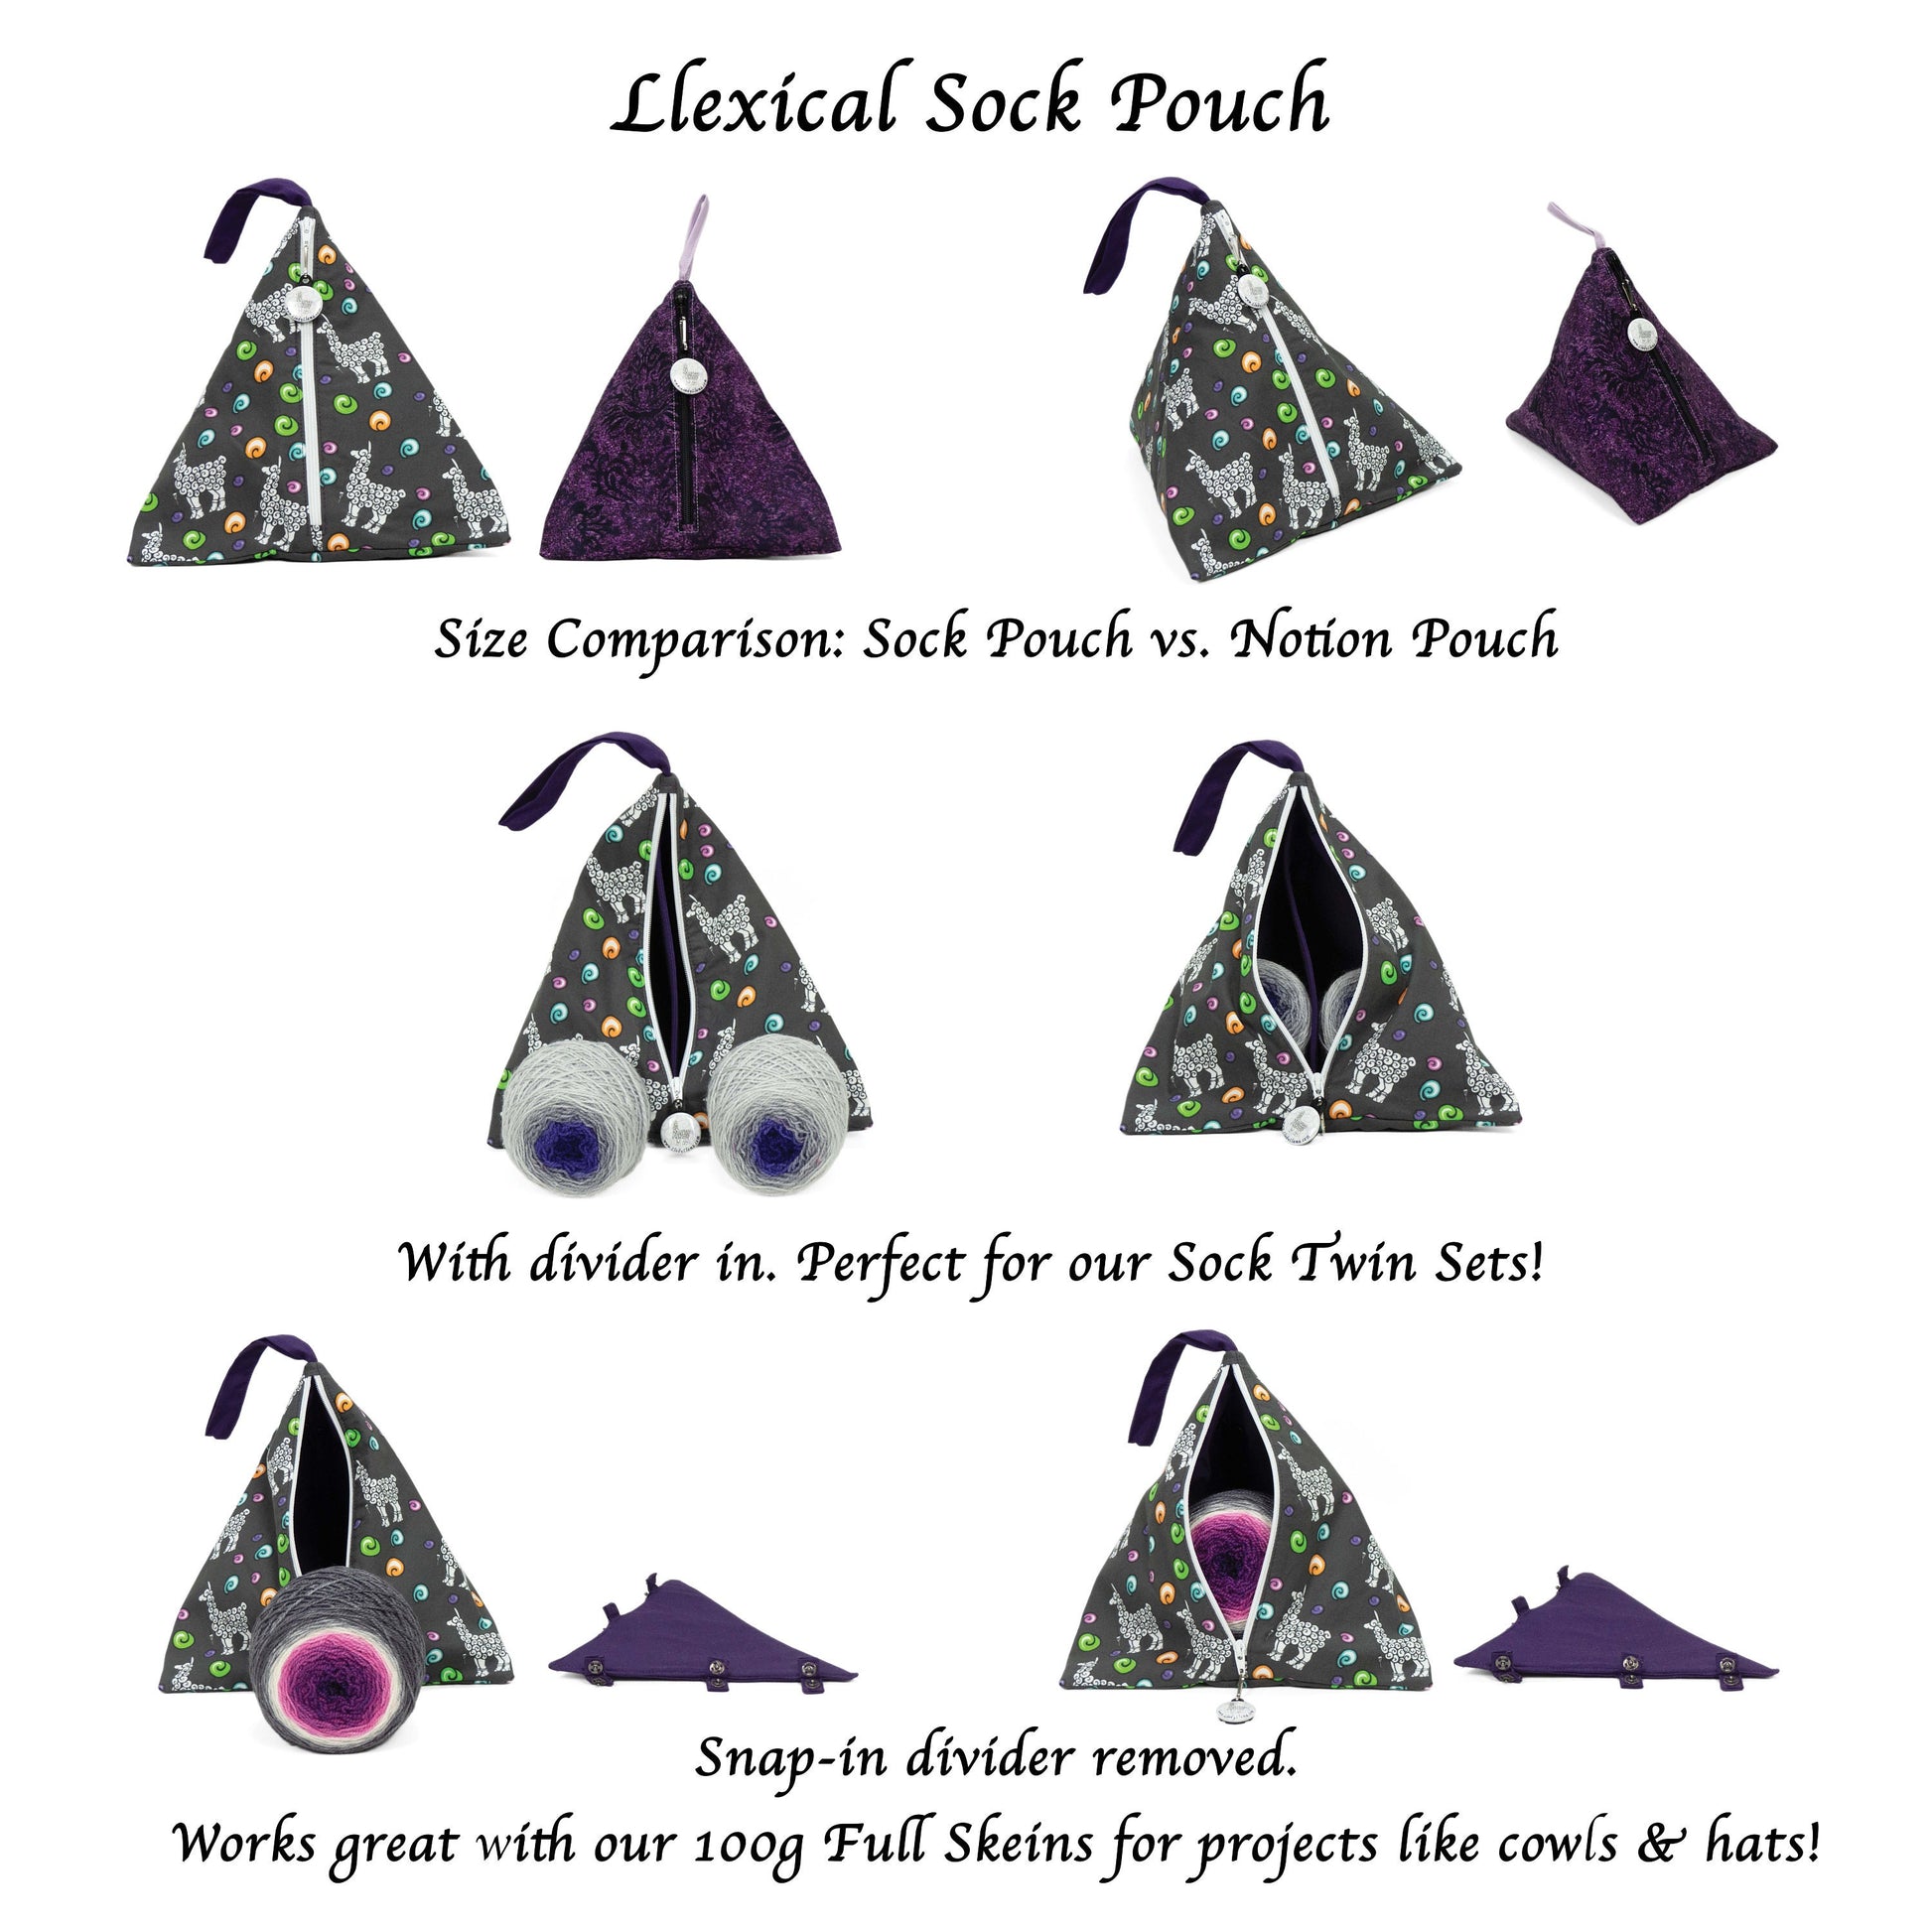 Gnome Floral - Llexical Divided Sock Pouch - Knitting, Crochet, Spinning Project Bag